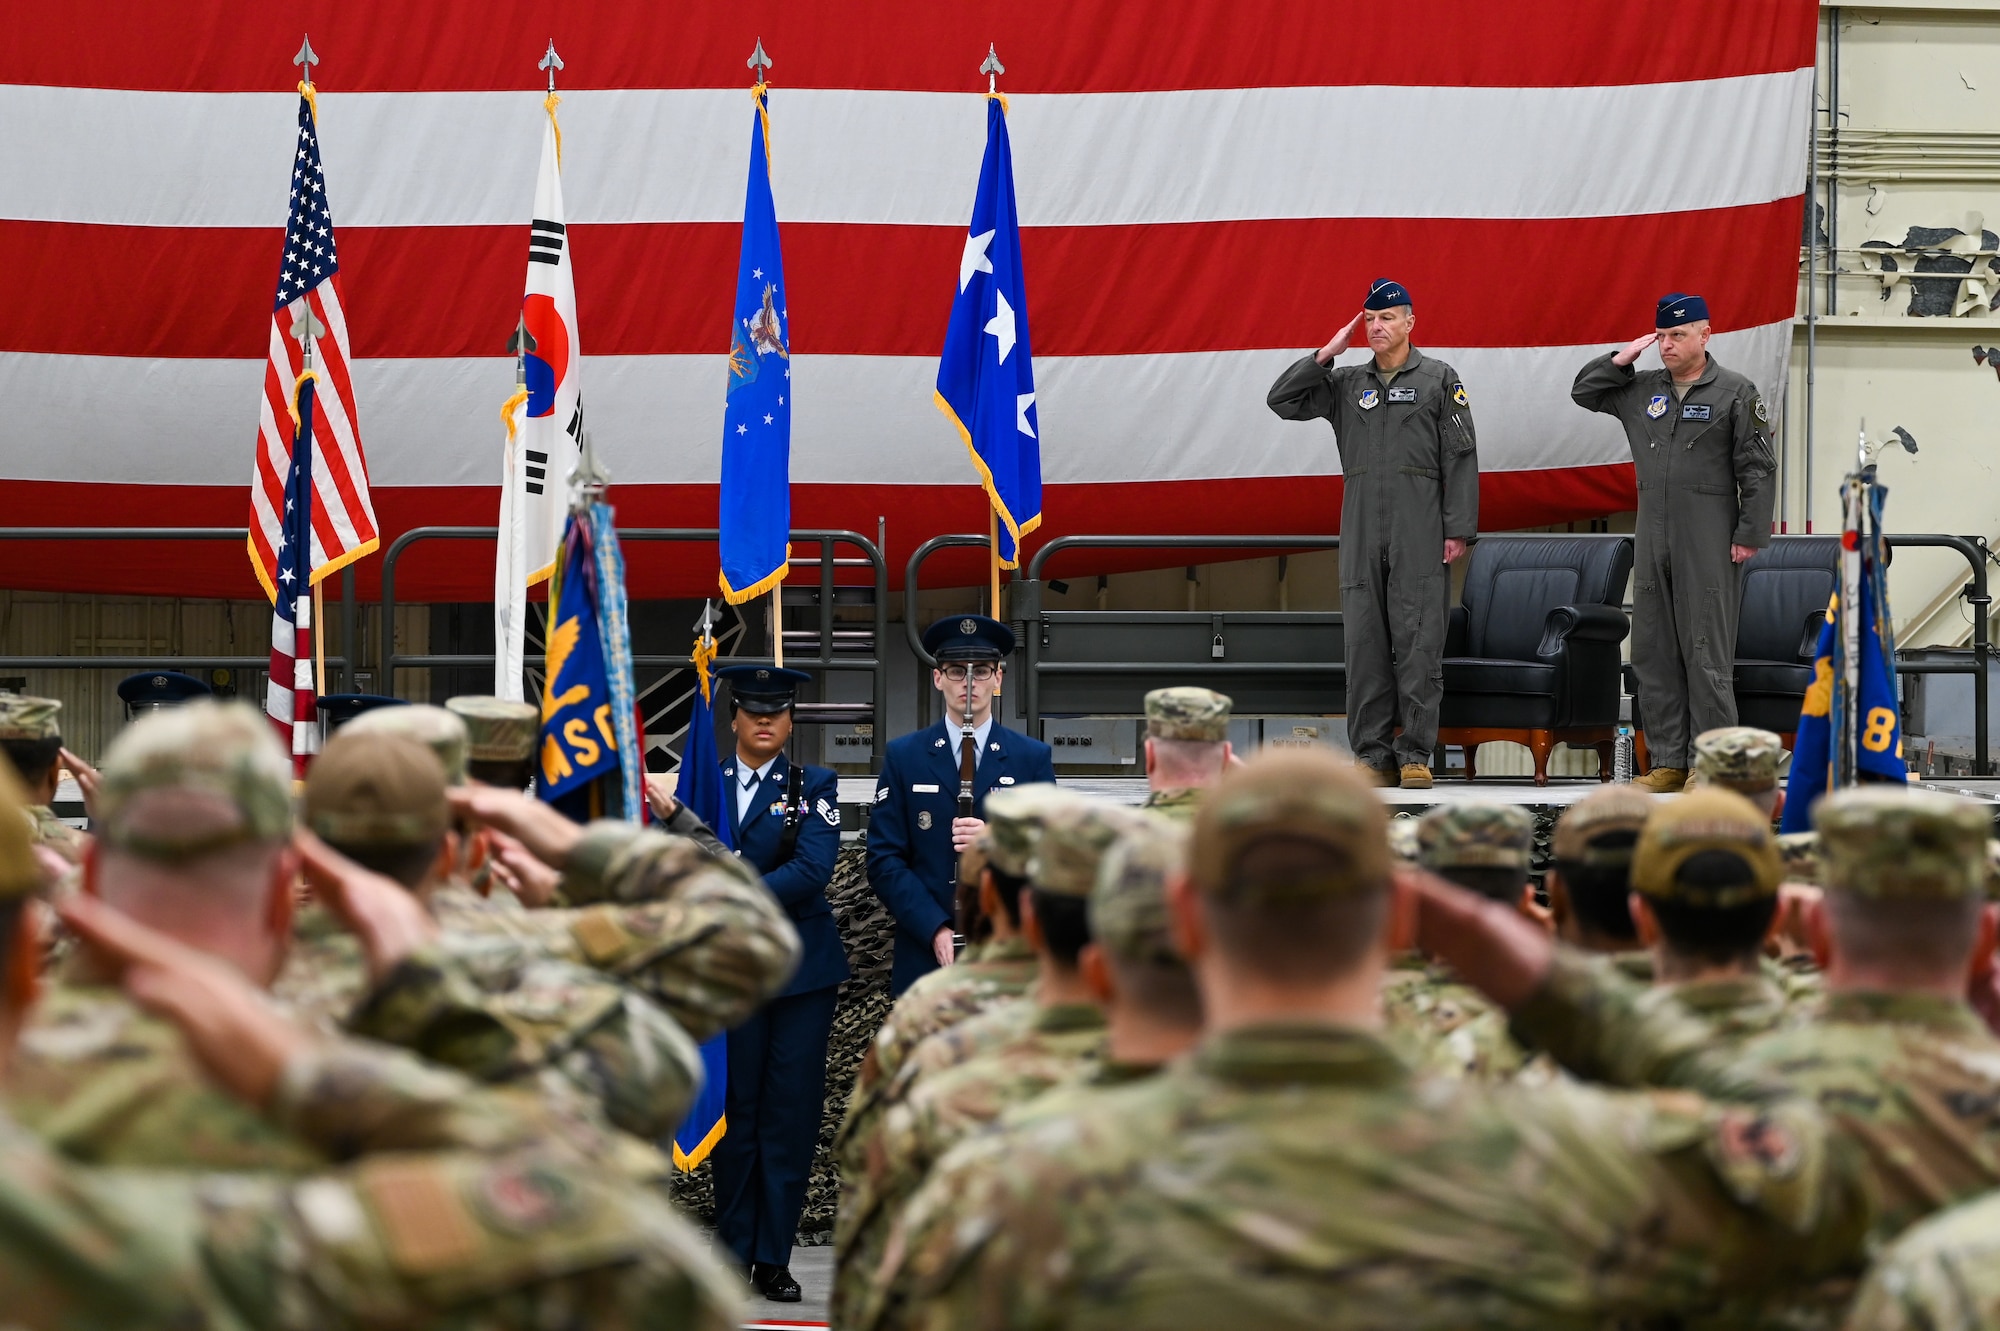 Lt. Gen. Scott Pleus nd Col. Matthew C. Gaetke render a salute during the U.S. and Republic of Korea national anthems during the 8th FW Assumption of Command ceremony.